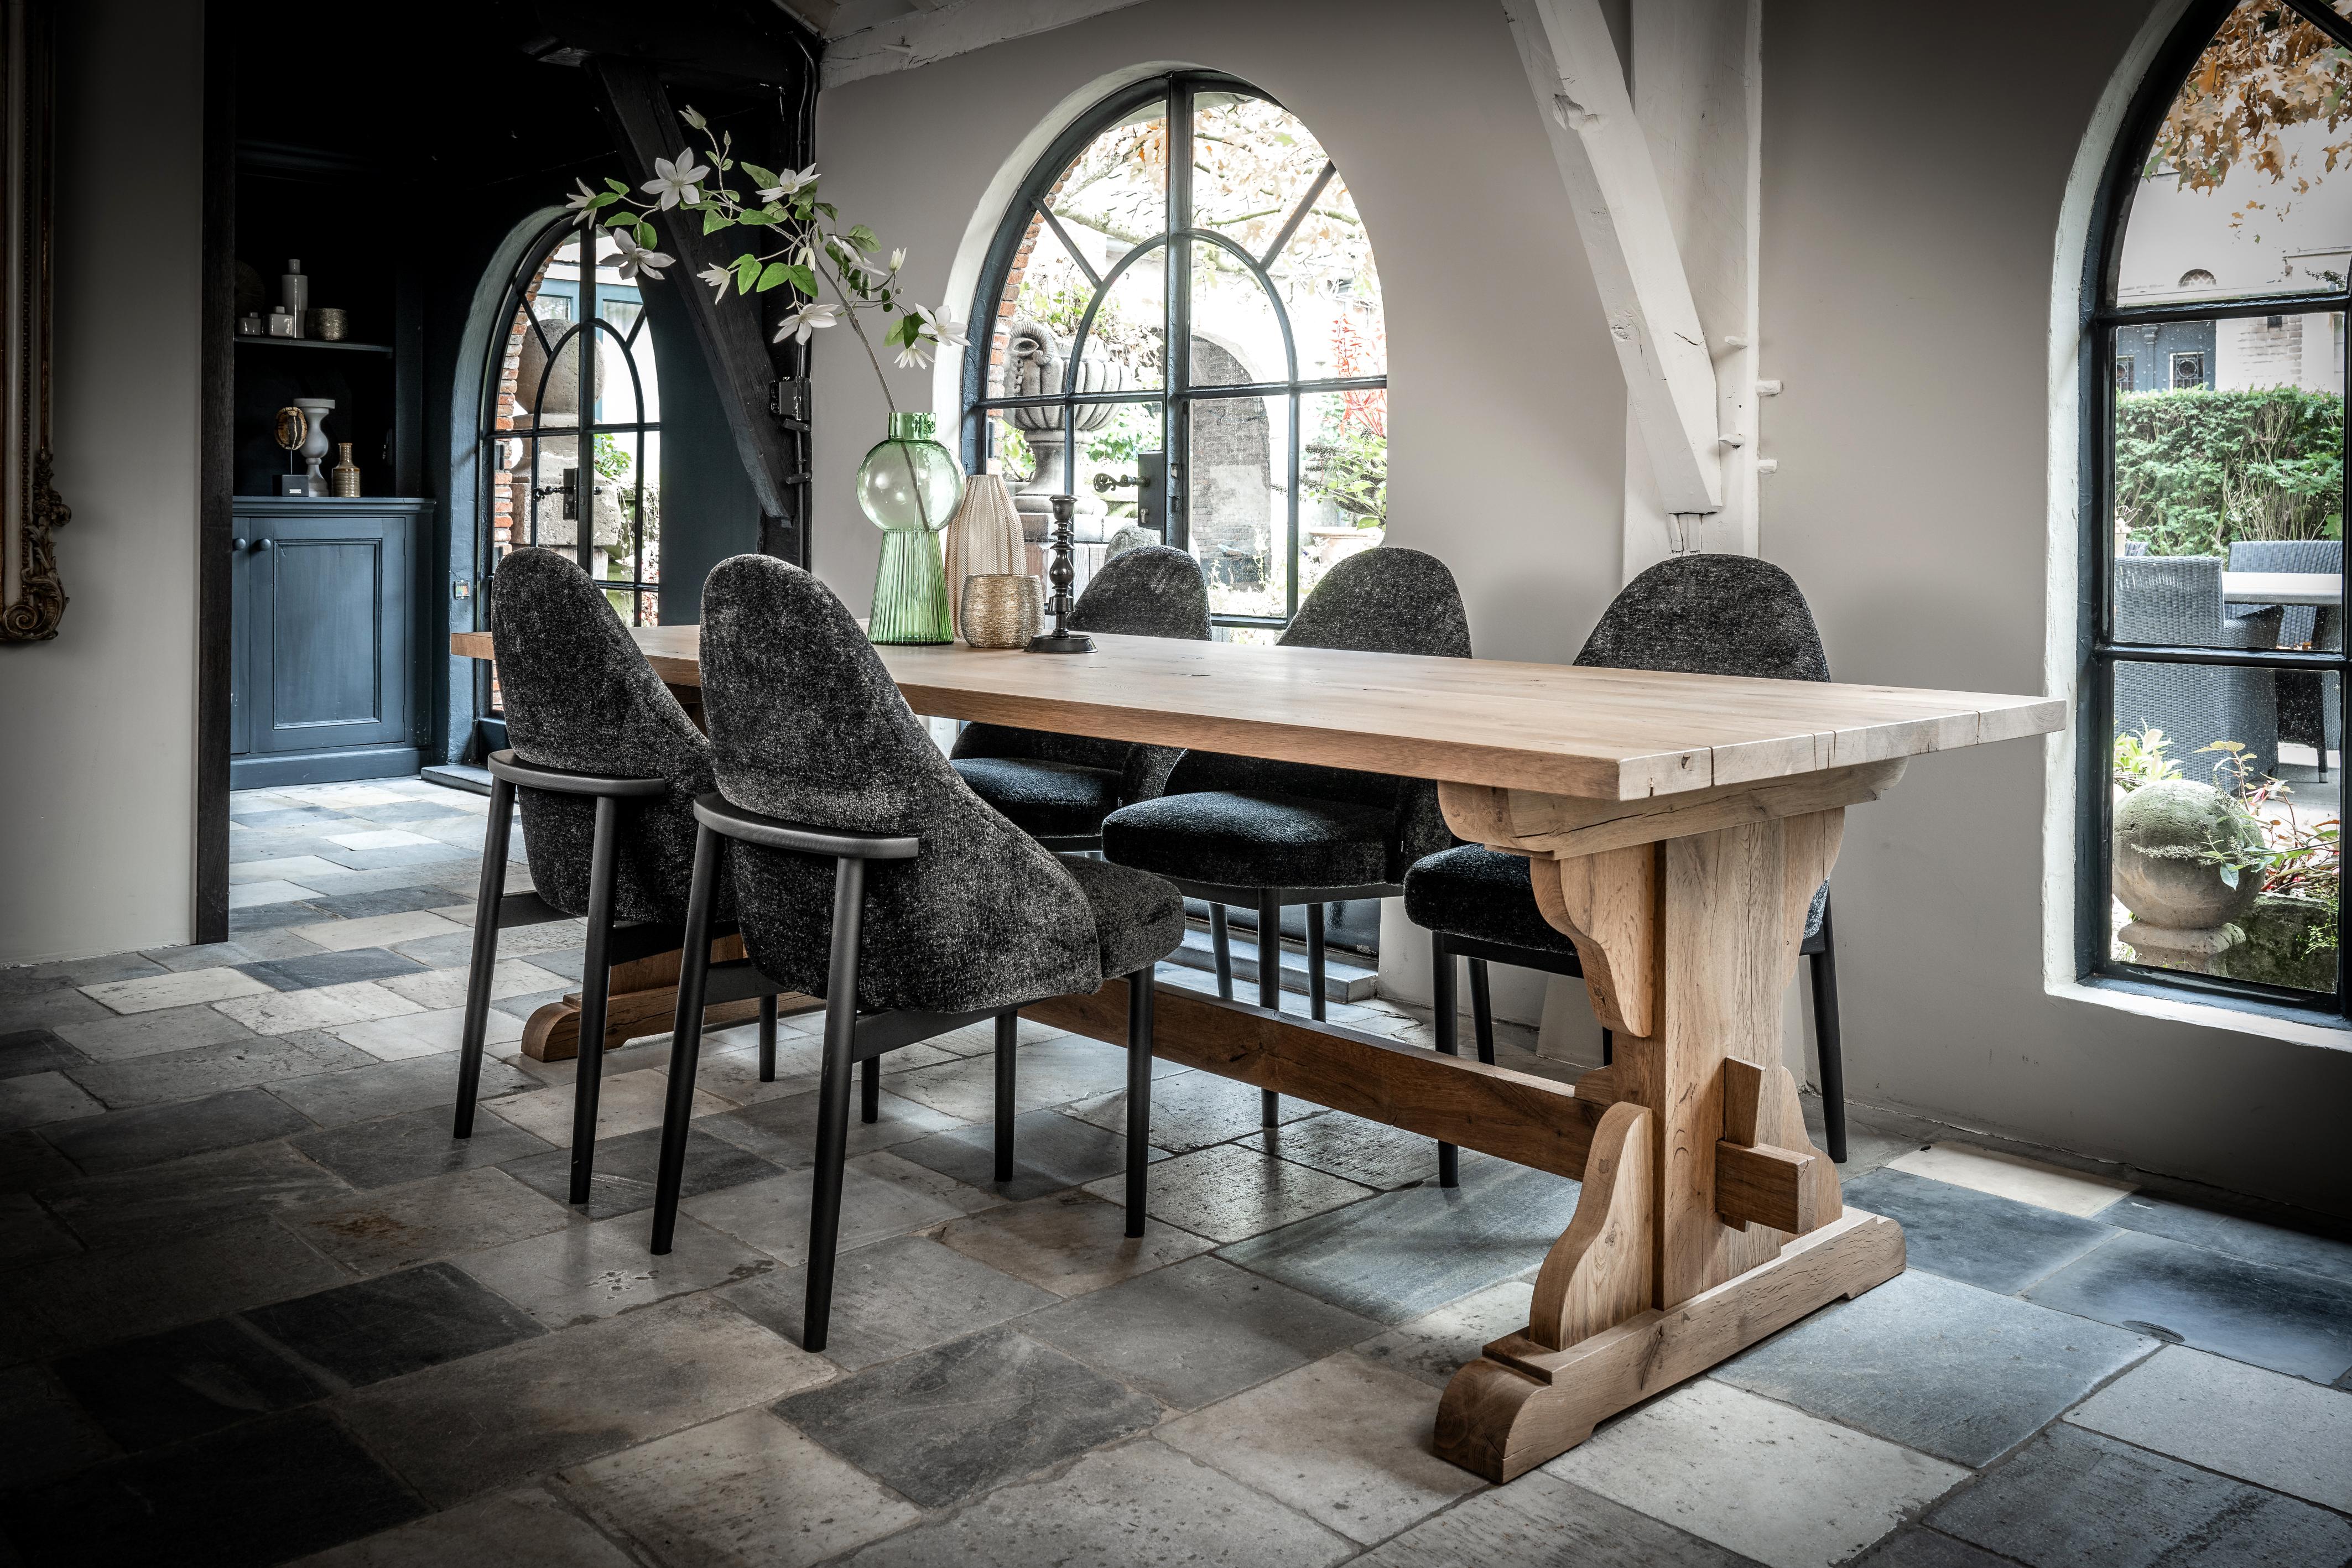 Presenting our Castle Table, inspired by the furniture gracing the halls of ancient castles and monasteries, where gatherings for meals and drinks were a tradition. Crafted by our highly skilled master craftsmen in the most artisanal manner, these